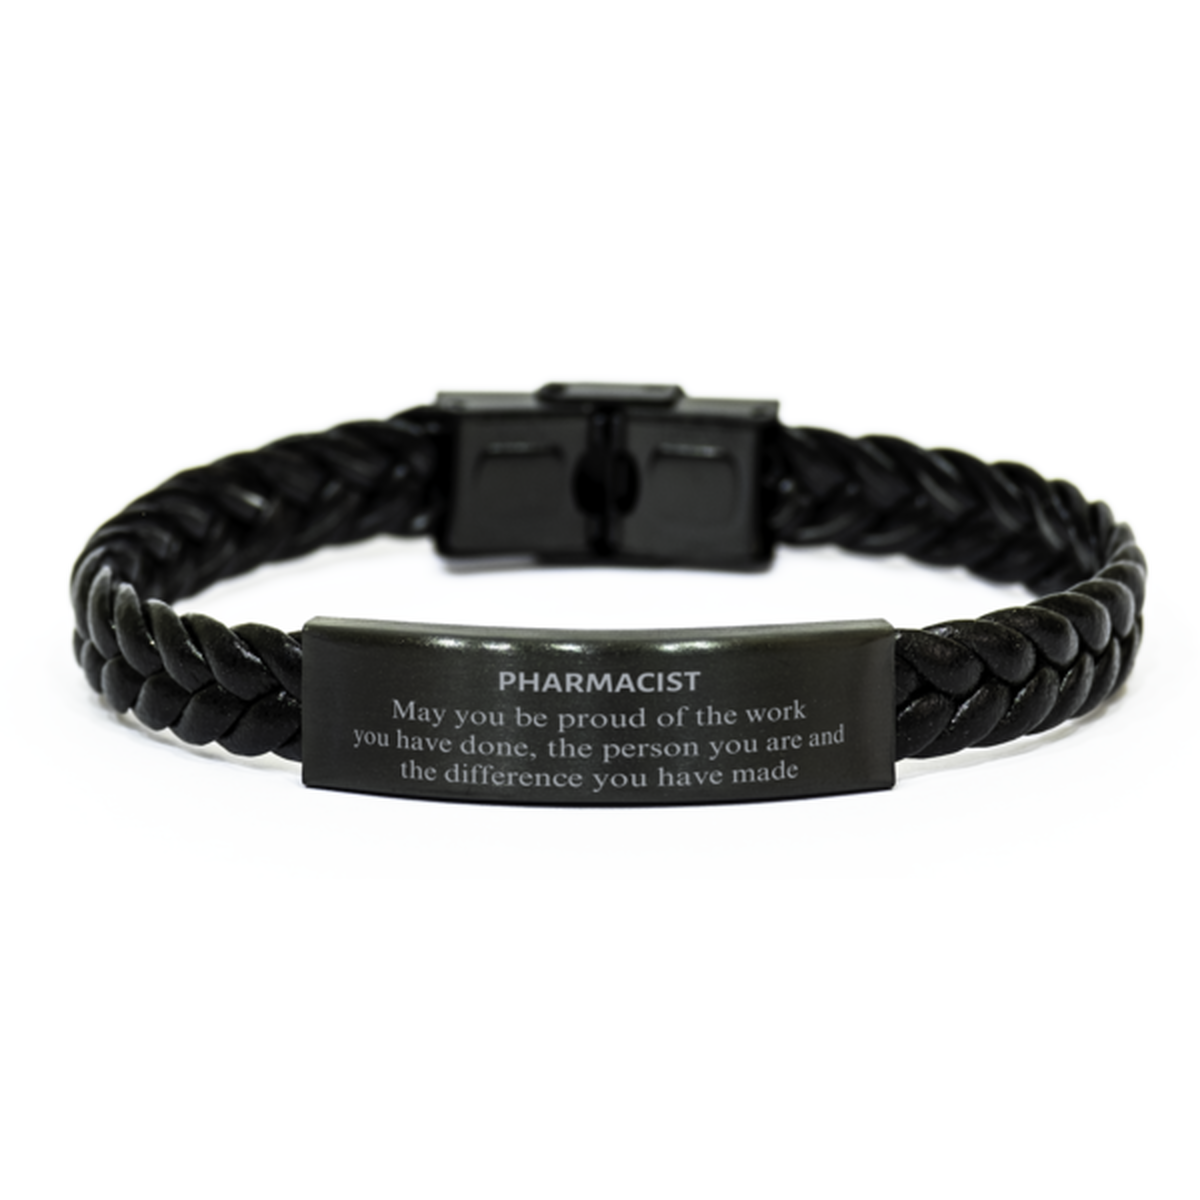 Pharmacist May you be proud of the work you have done, Retirement Pharmacist Braided Leather Bracelet for Colleague Appreciation Gifts Amazing for Pharmacist